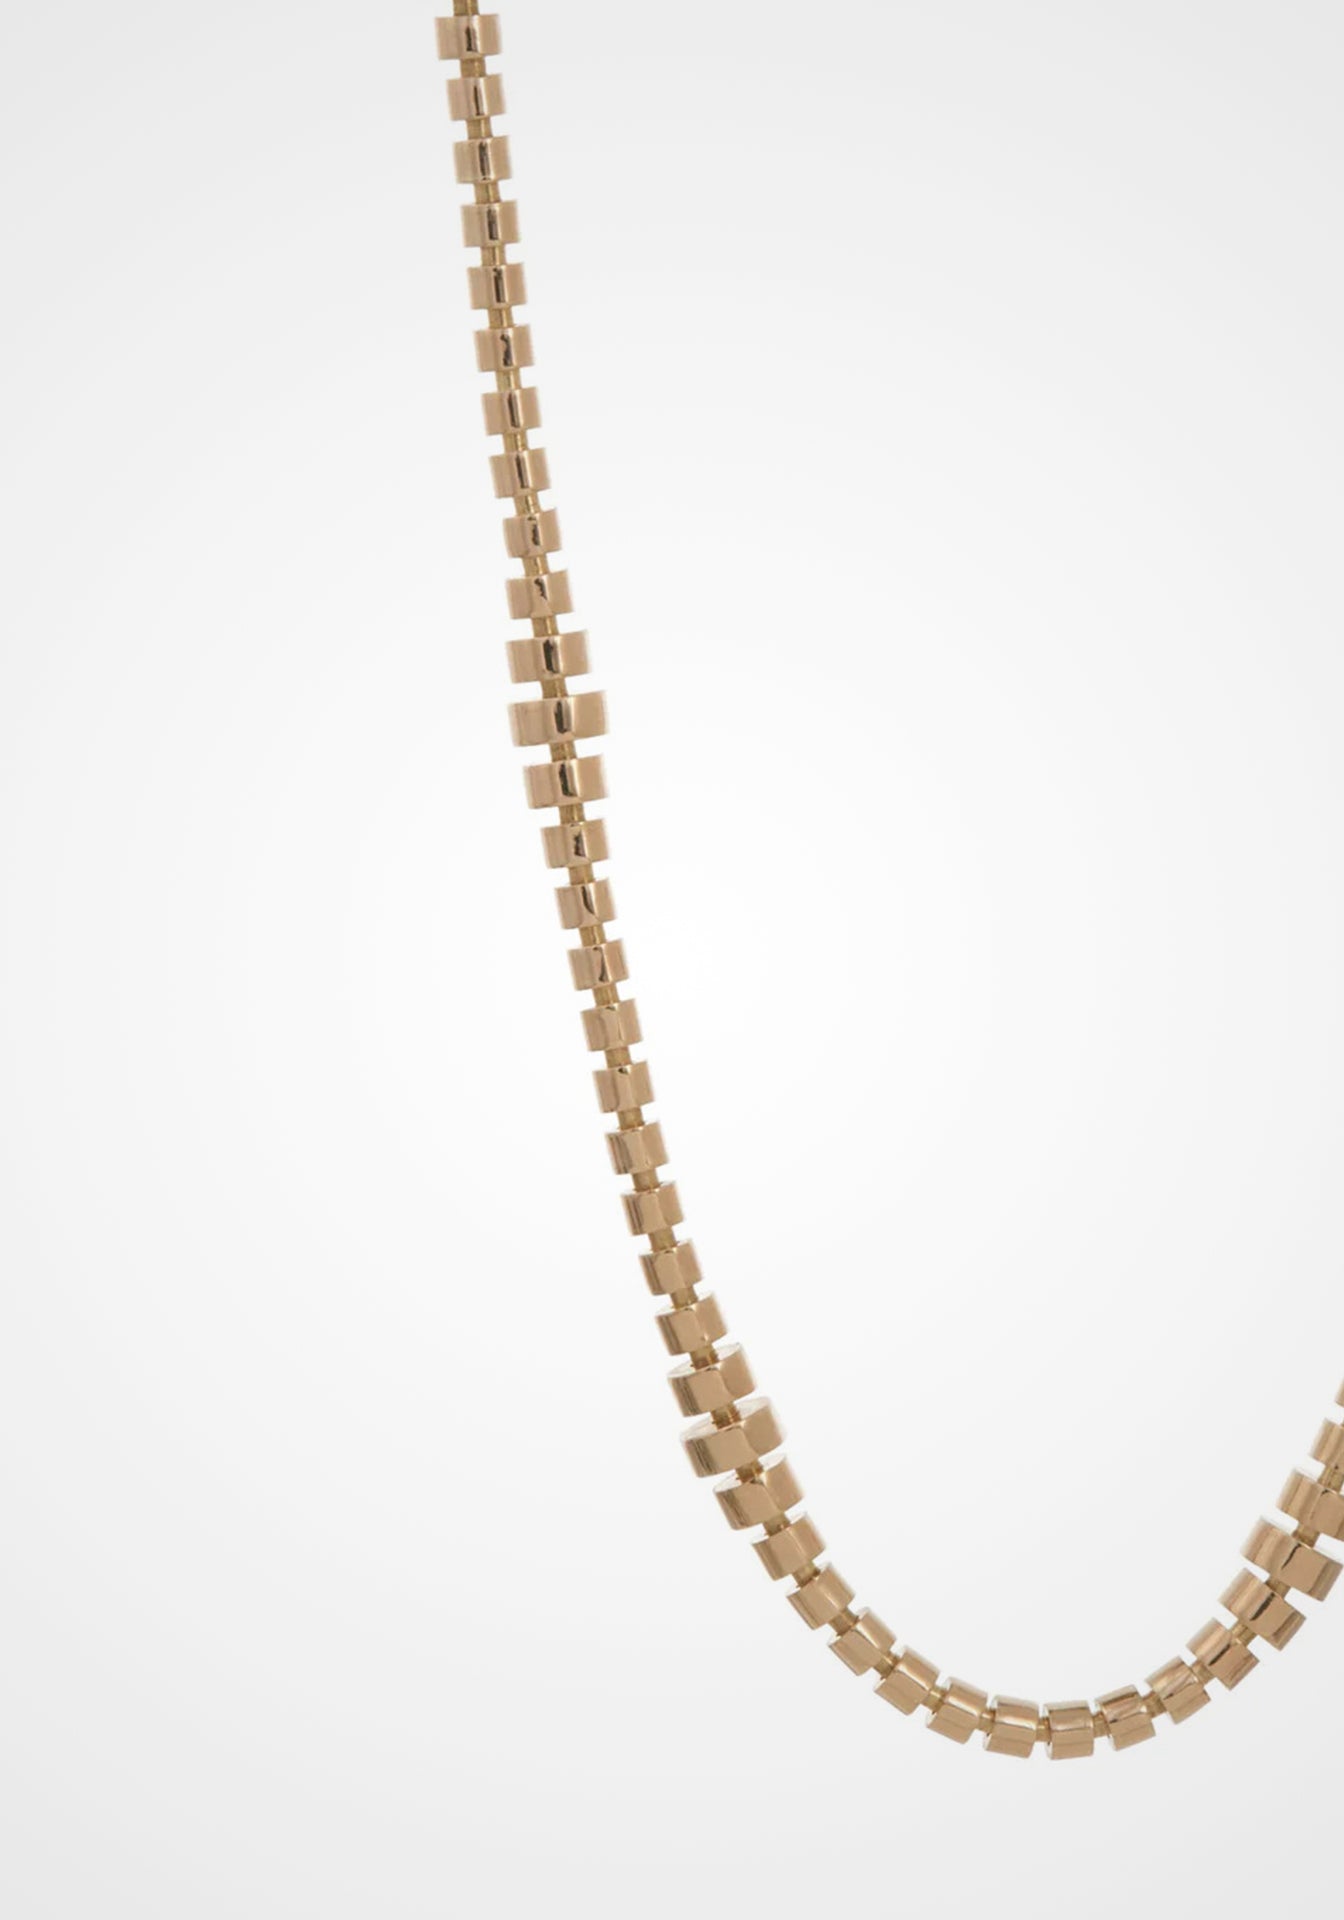 Mini Hourglass, 18K Yellow Gold Necklace